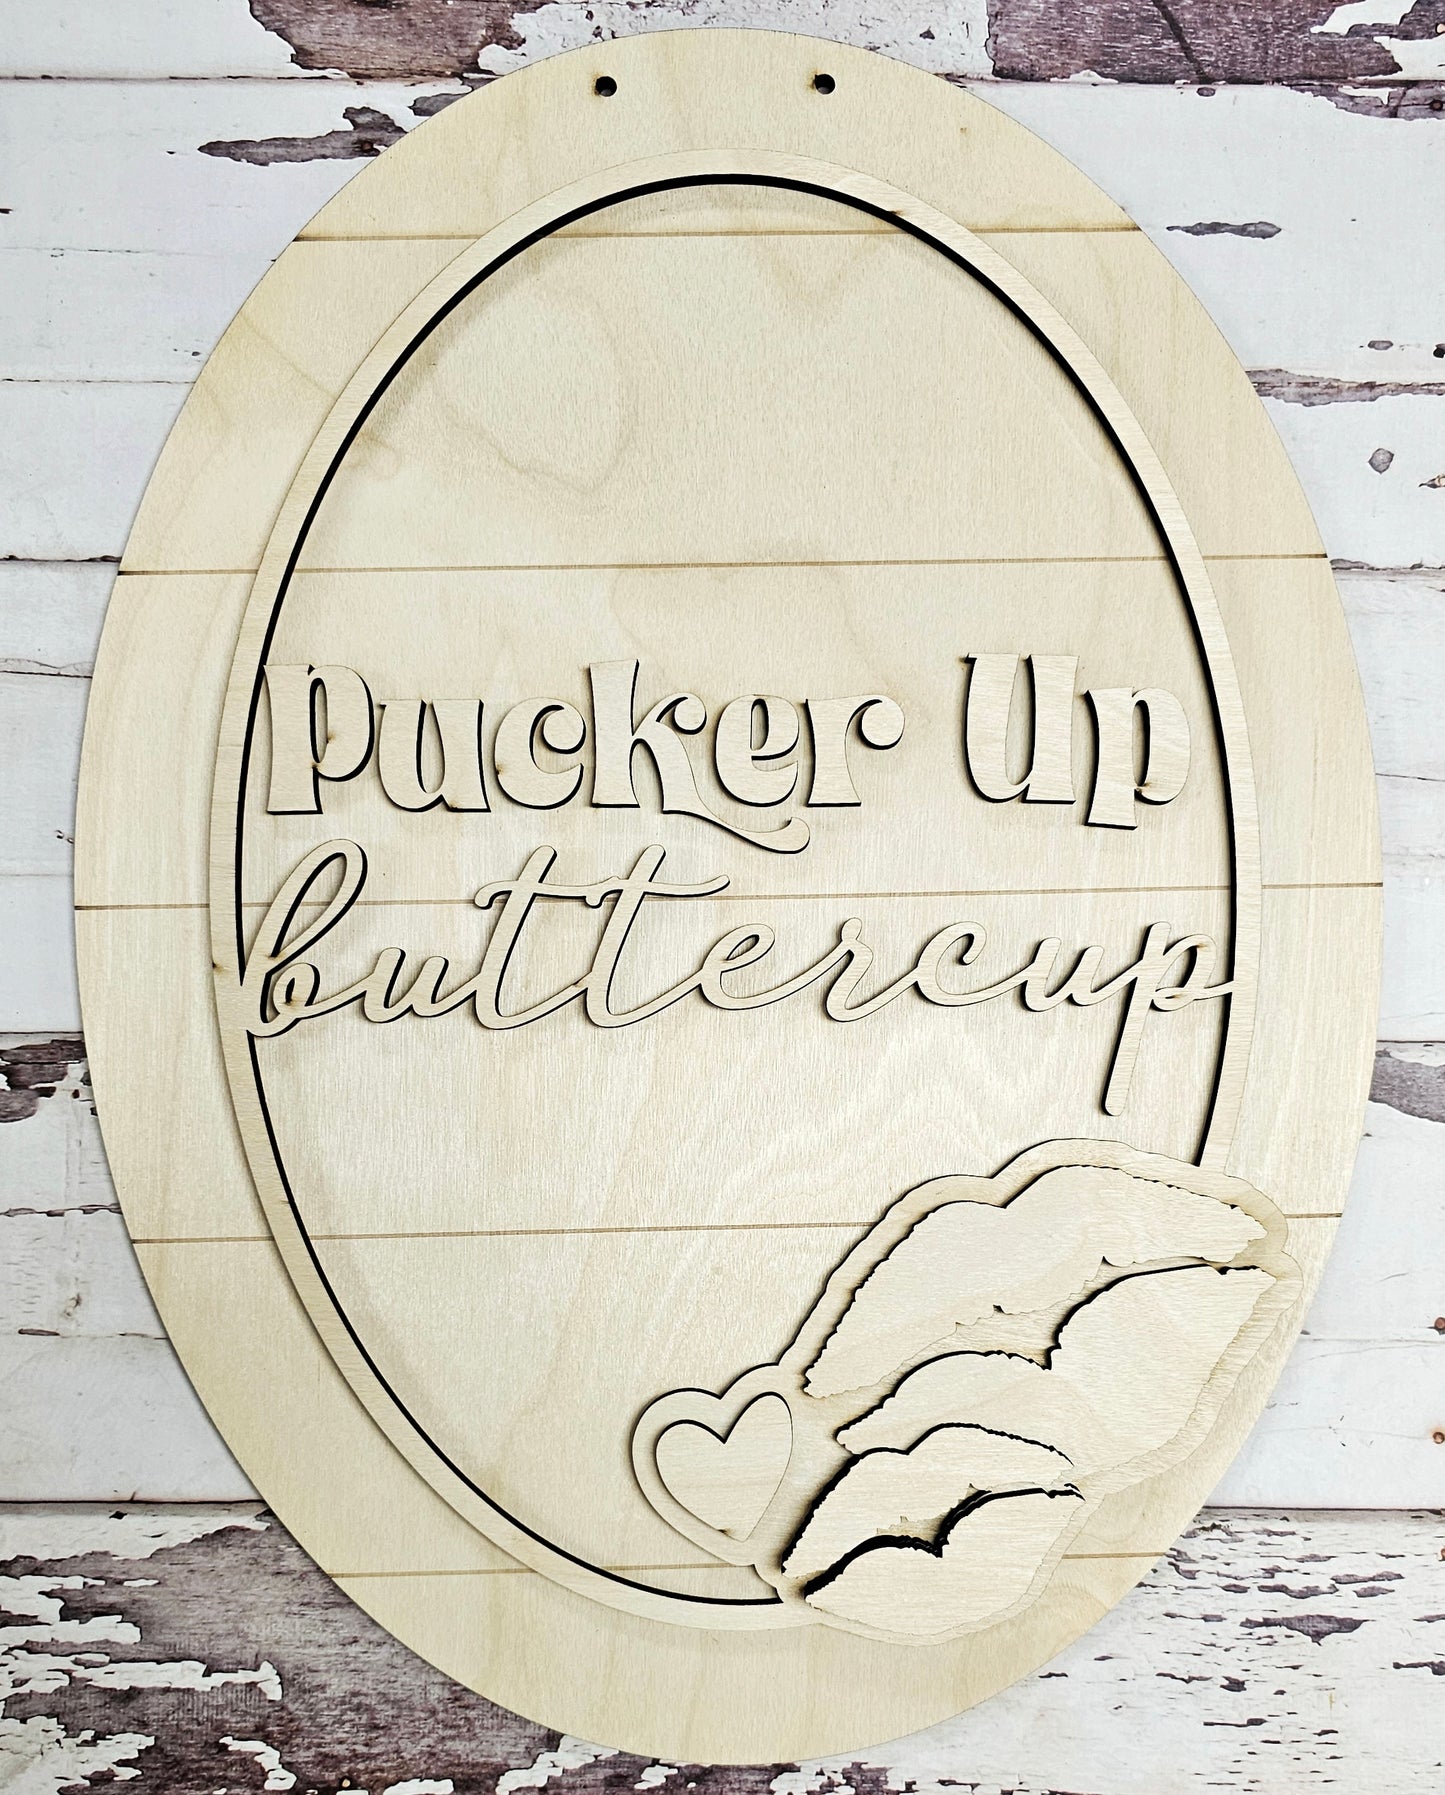 Pucker Up Buttercup Layers Sign - Ready to Paint Kit or Finished